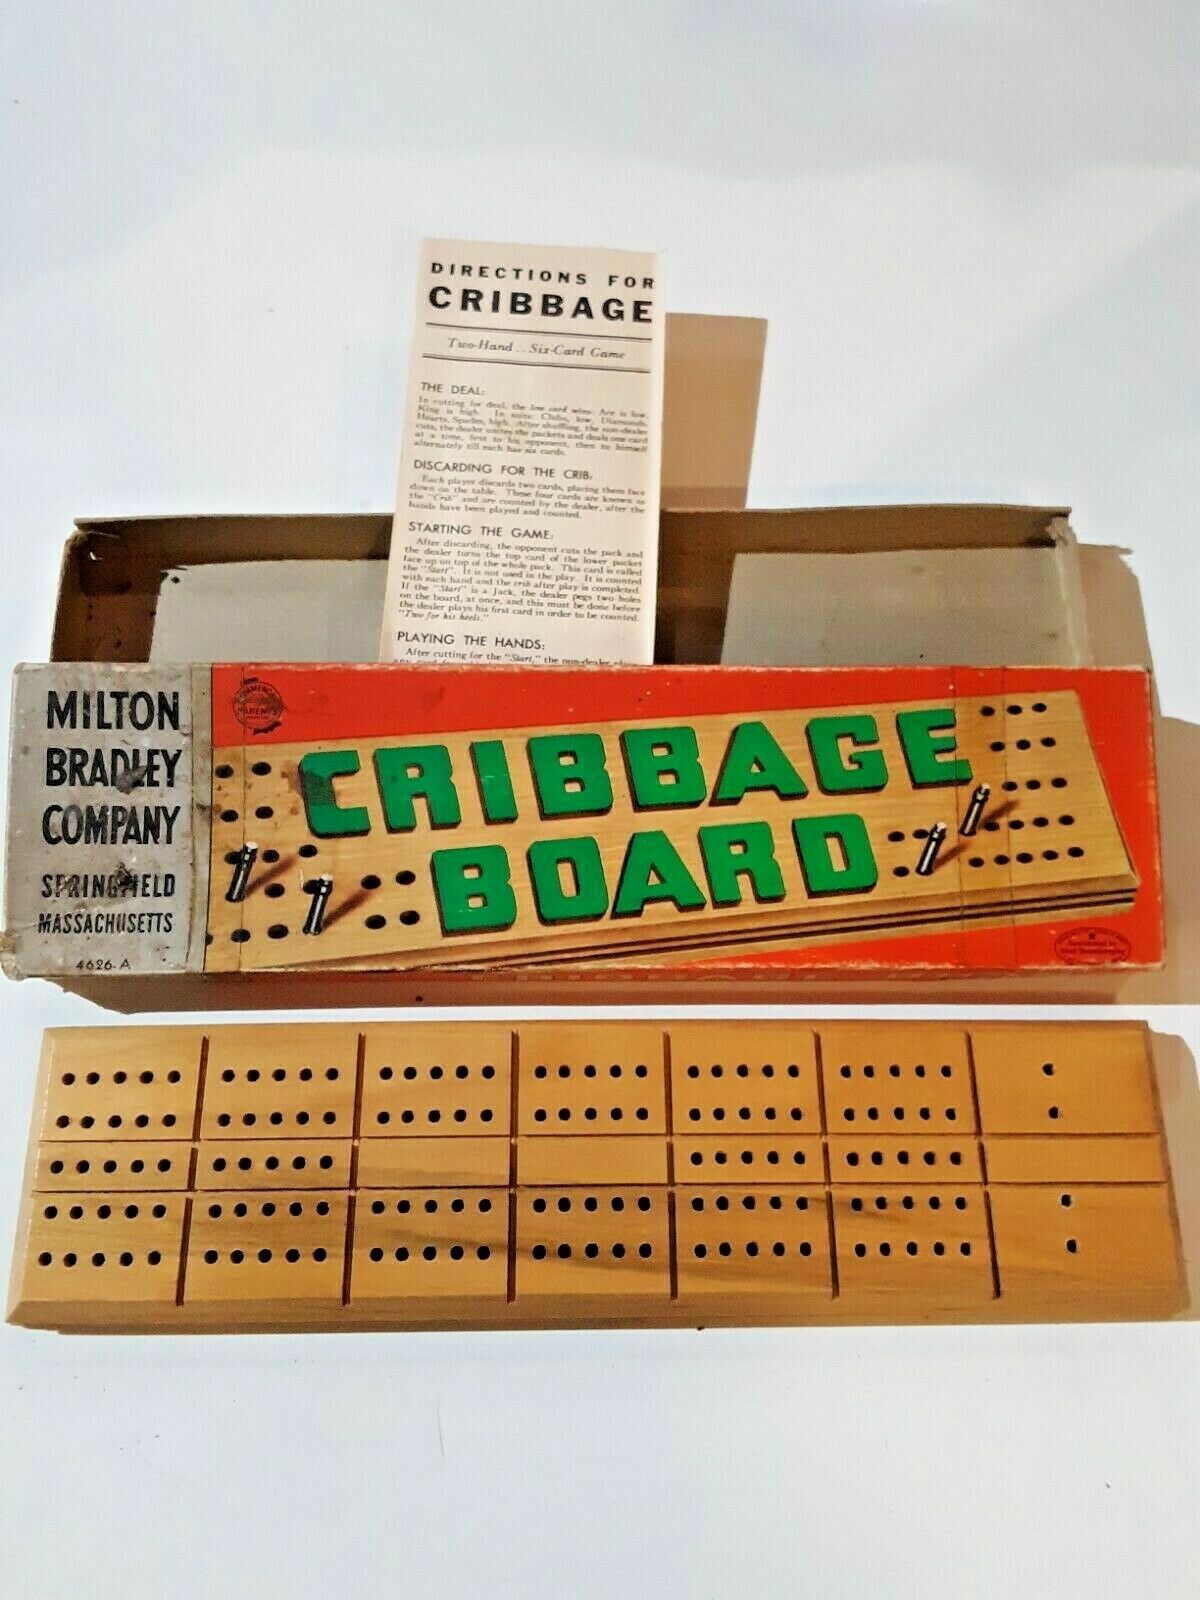 VINTAGE Milton Bradley Company Wooden Cribbage Board With Metal Pegs #4626-A - $22.72